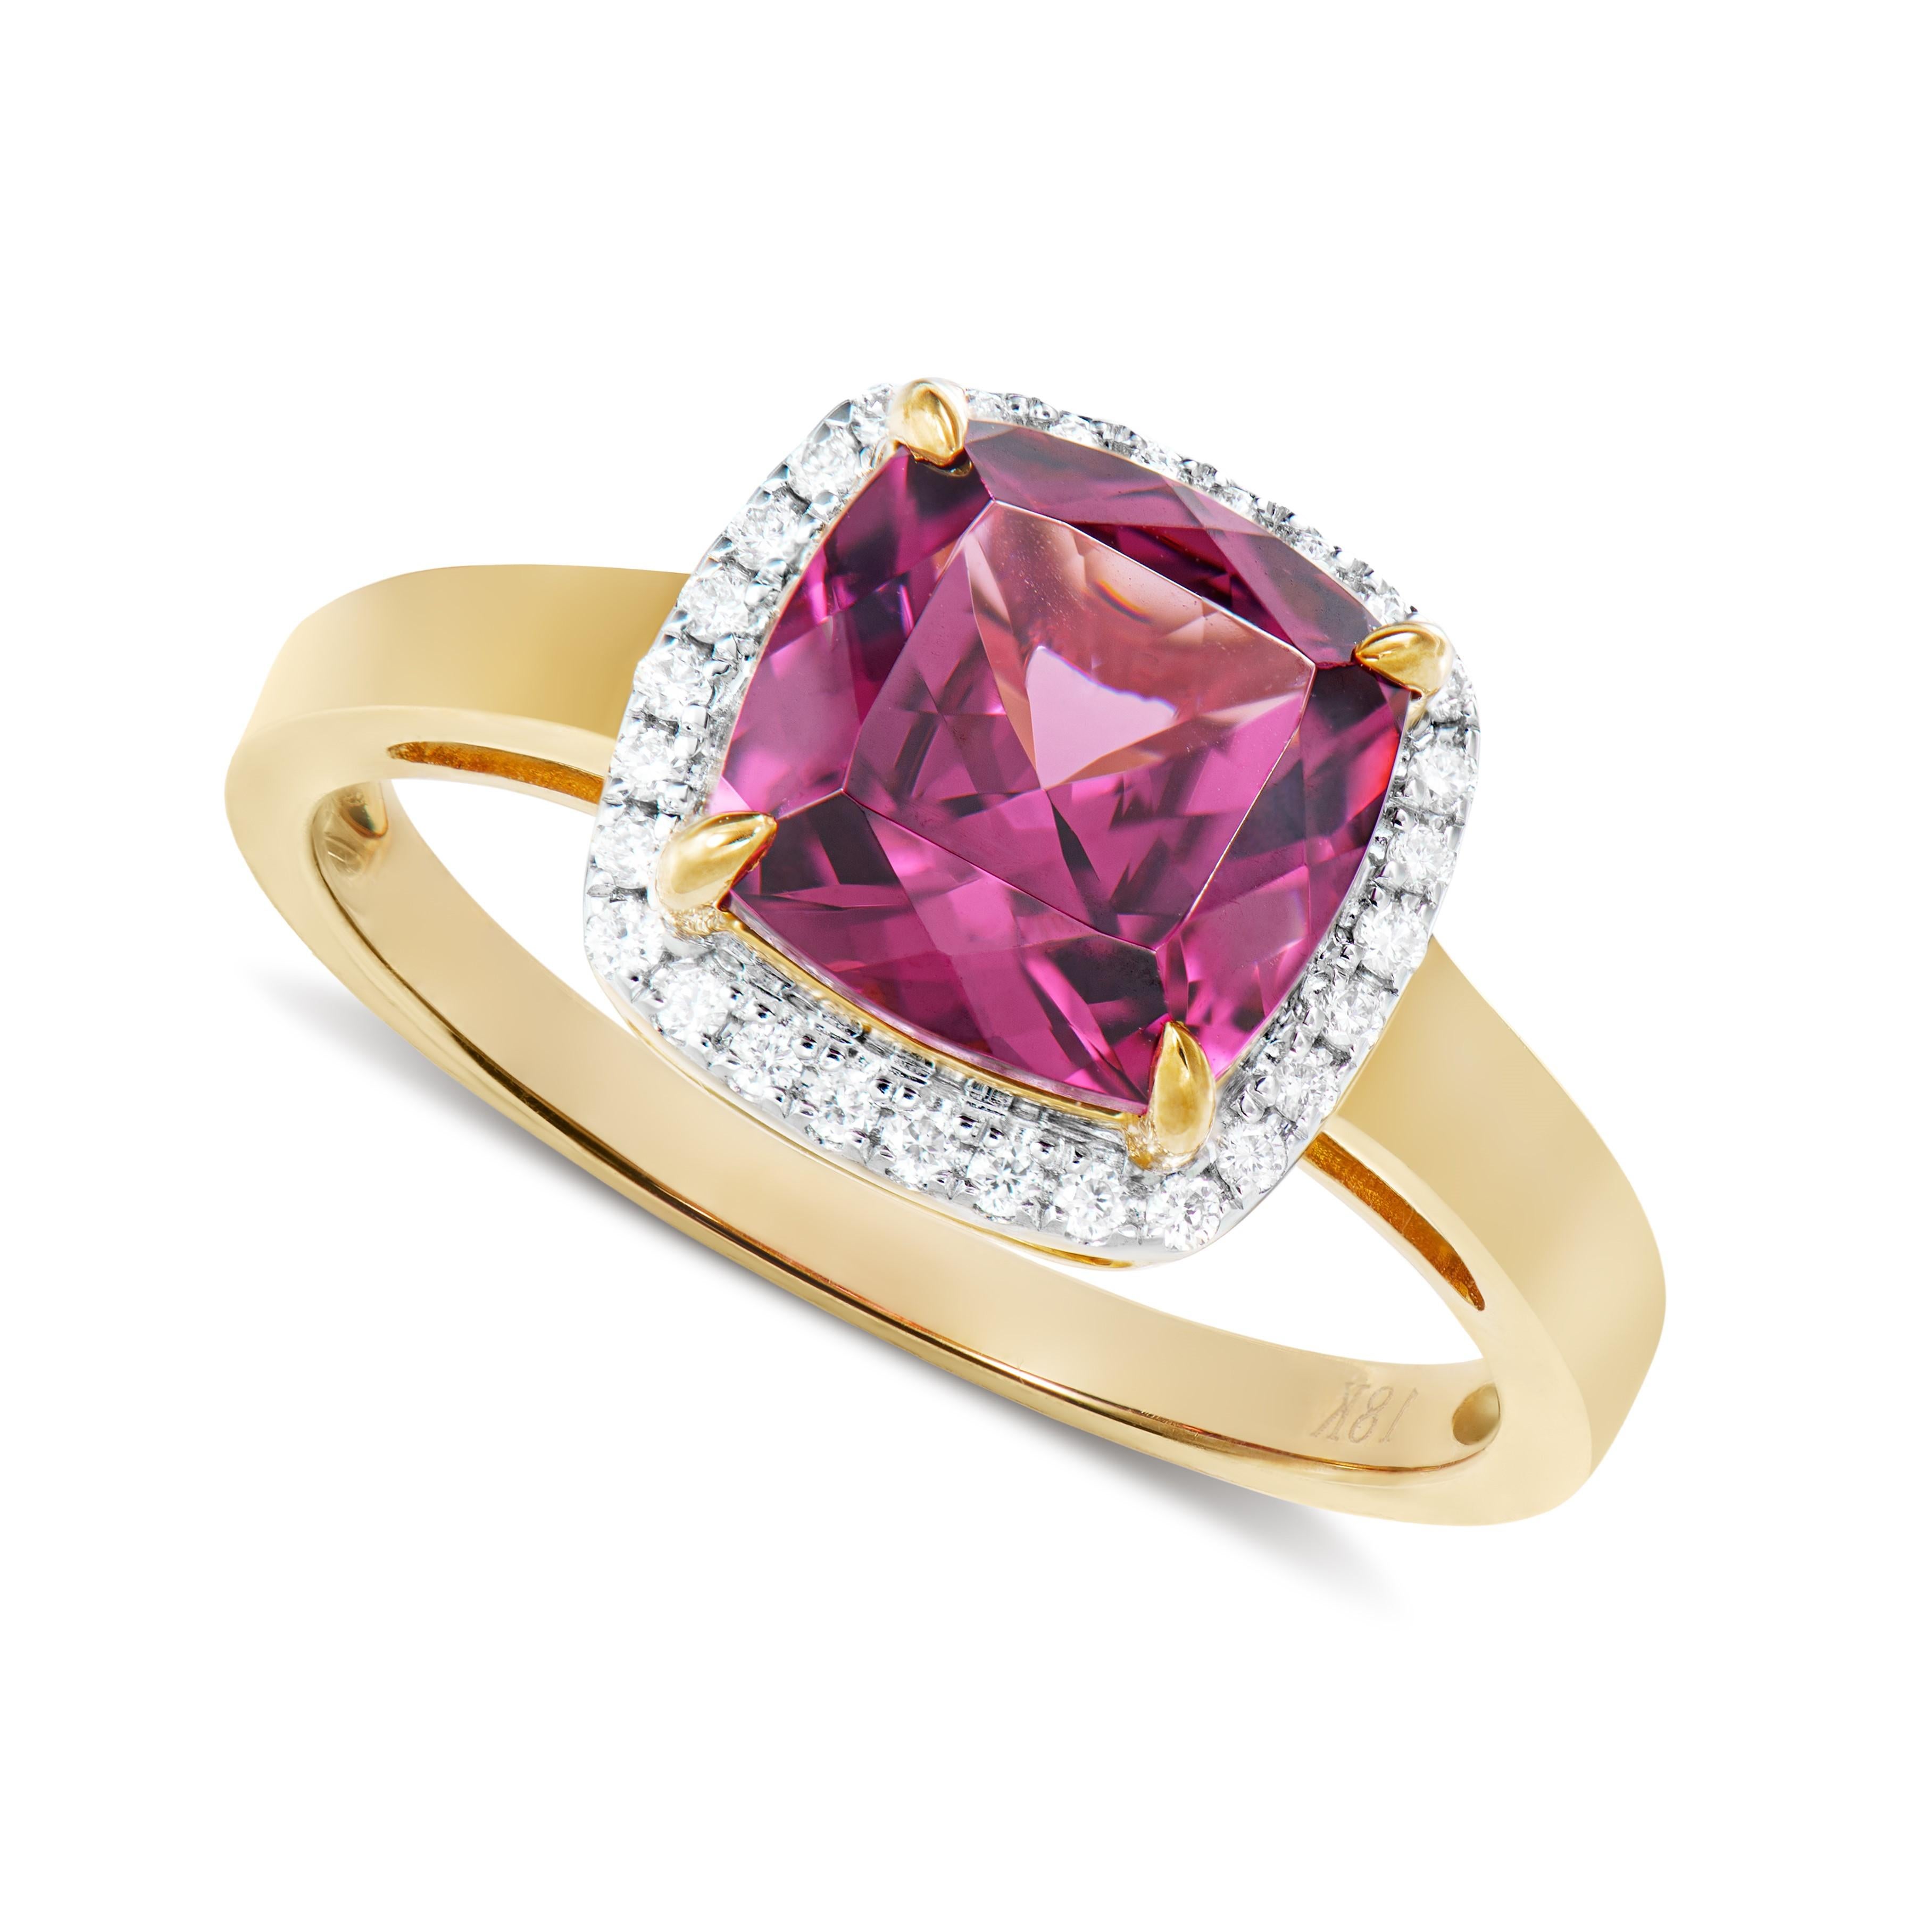 Presented A lovely collection of gems, including Amethyst, Peridot, Rhodolite, Sky Blue Topaz, Swiss Blue Topaz and Morganite is perfect for people who value quality and want to wear it to any occasion or celebration. The yellow gold Rhodolite Ring